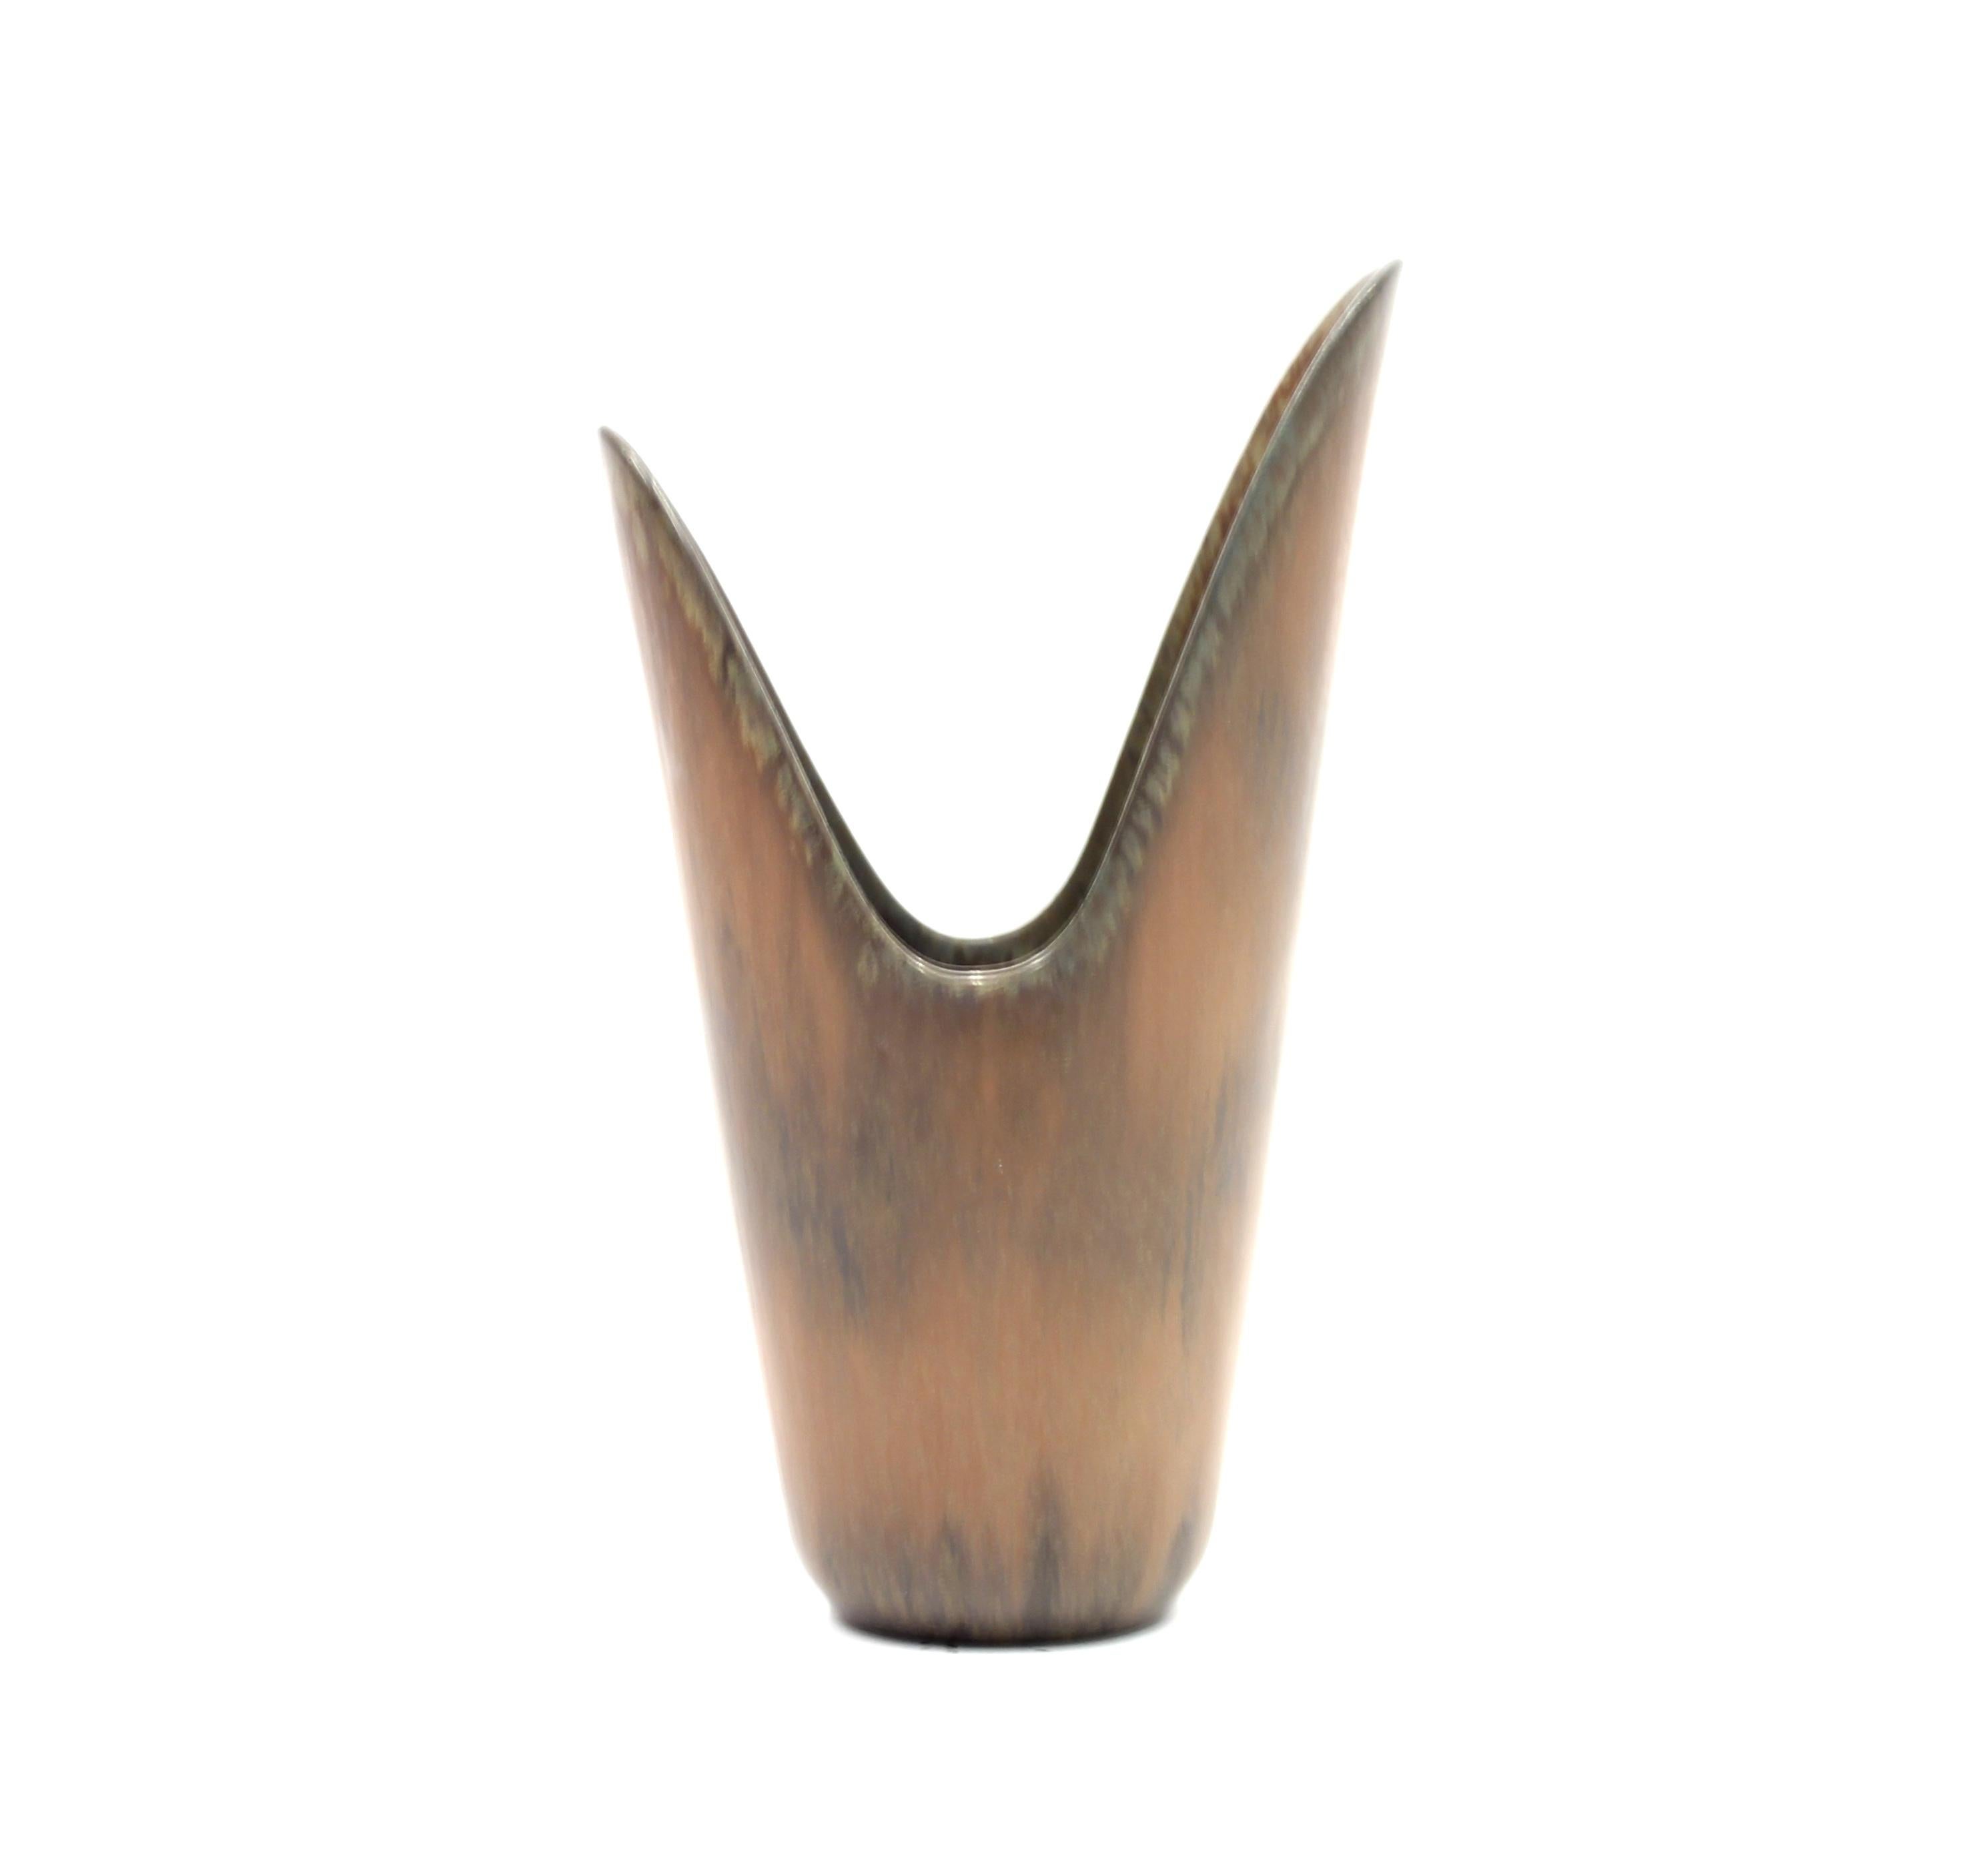 Scandinavian Modern Pike's Mouth Vase by Gunnar Nylund for Rörstrand, 1950s